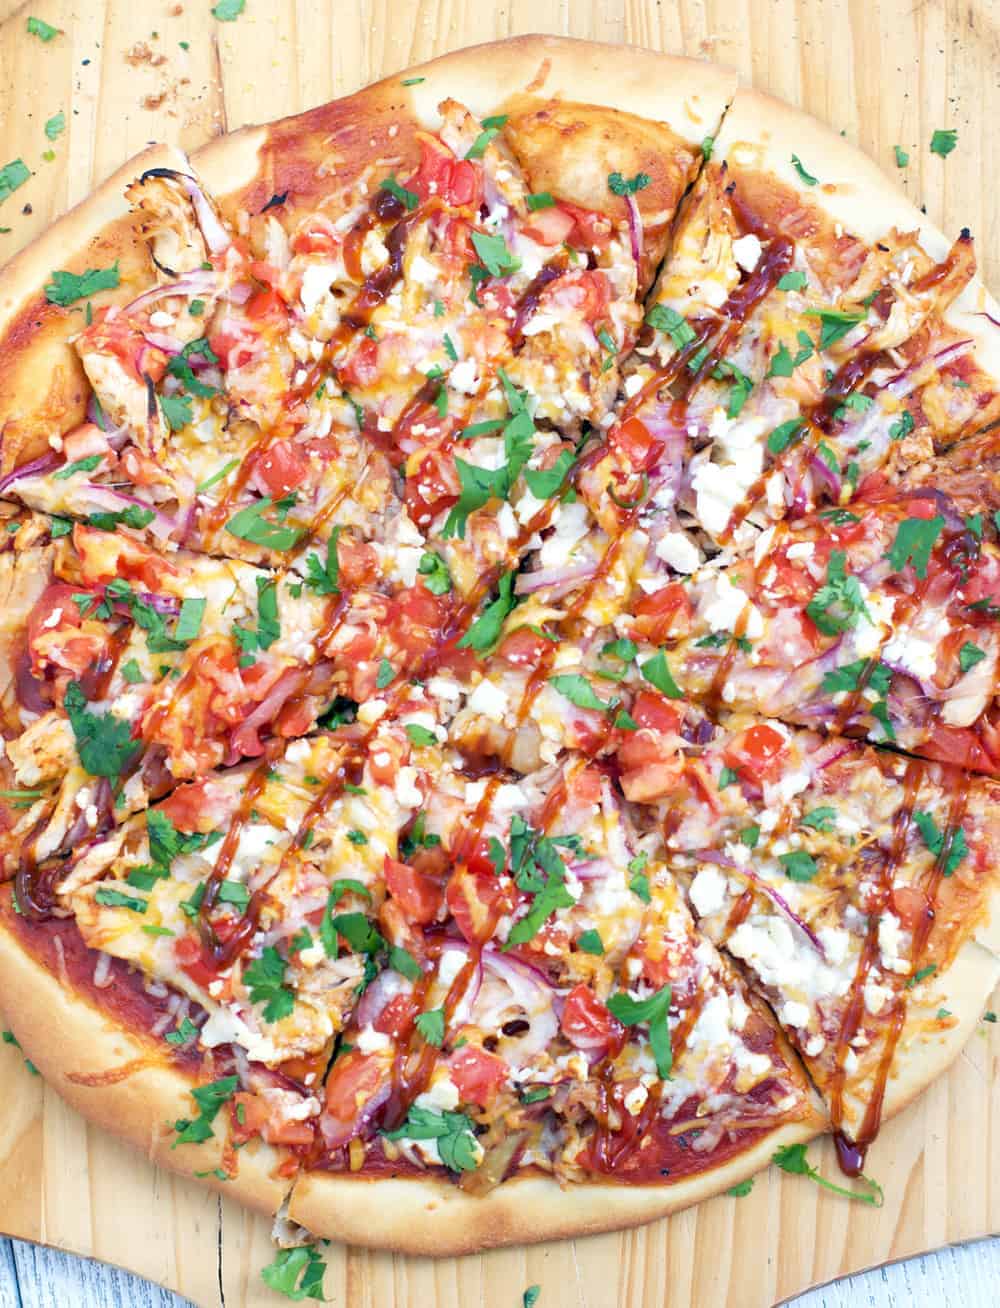 Smoked BBQ Chicken Pizza drizzled with bbq sauce